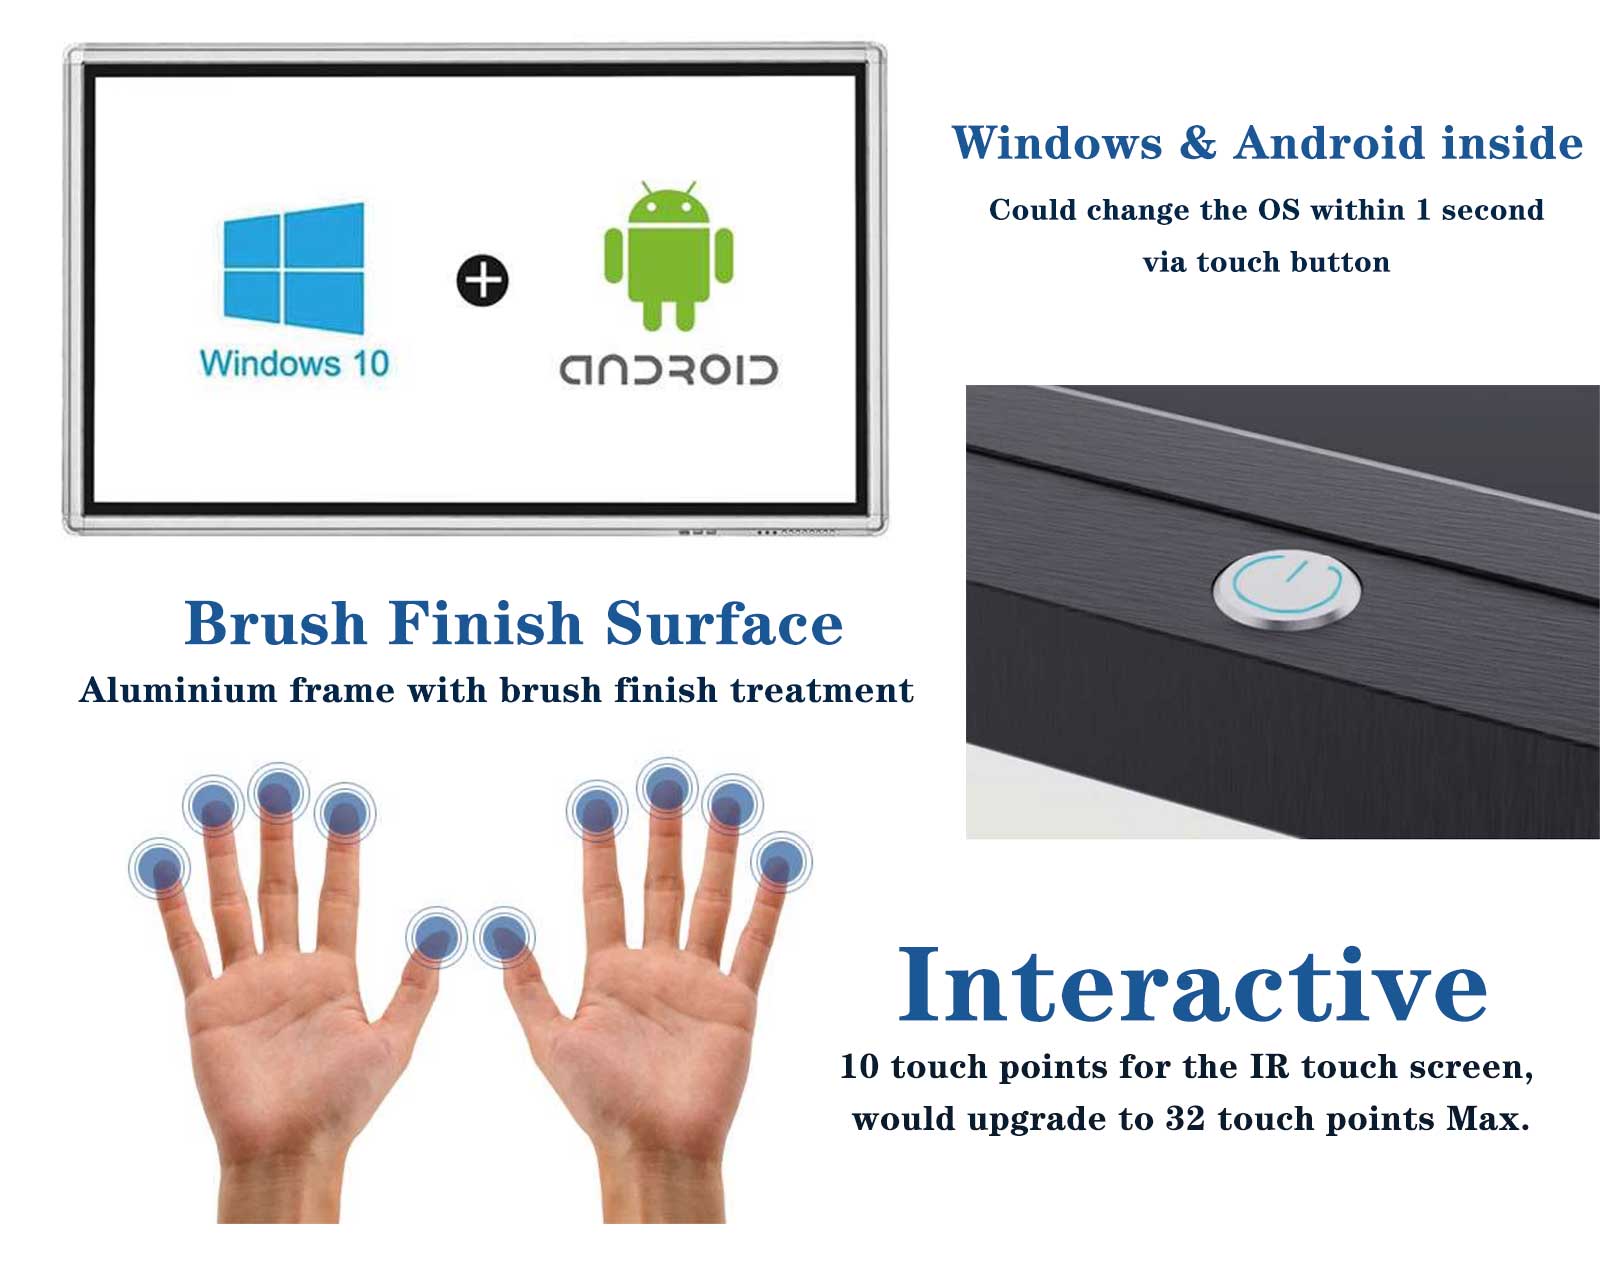 Interactive Touch whiteboard